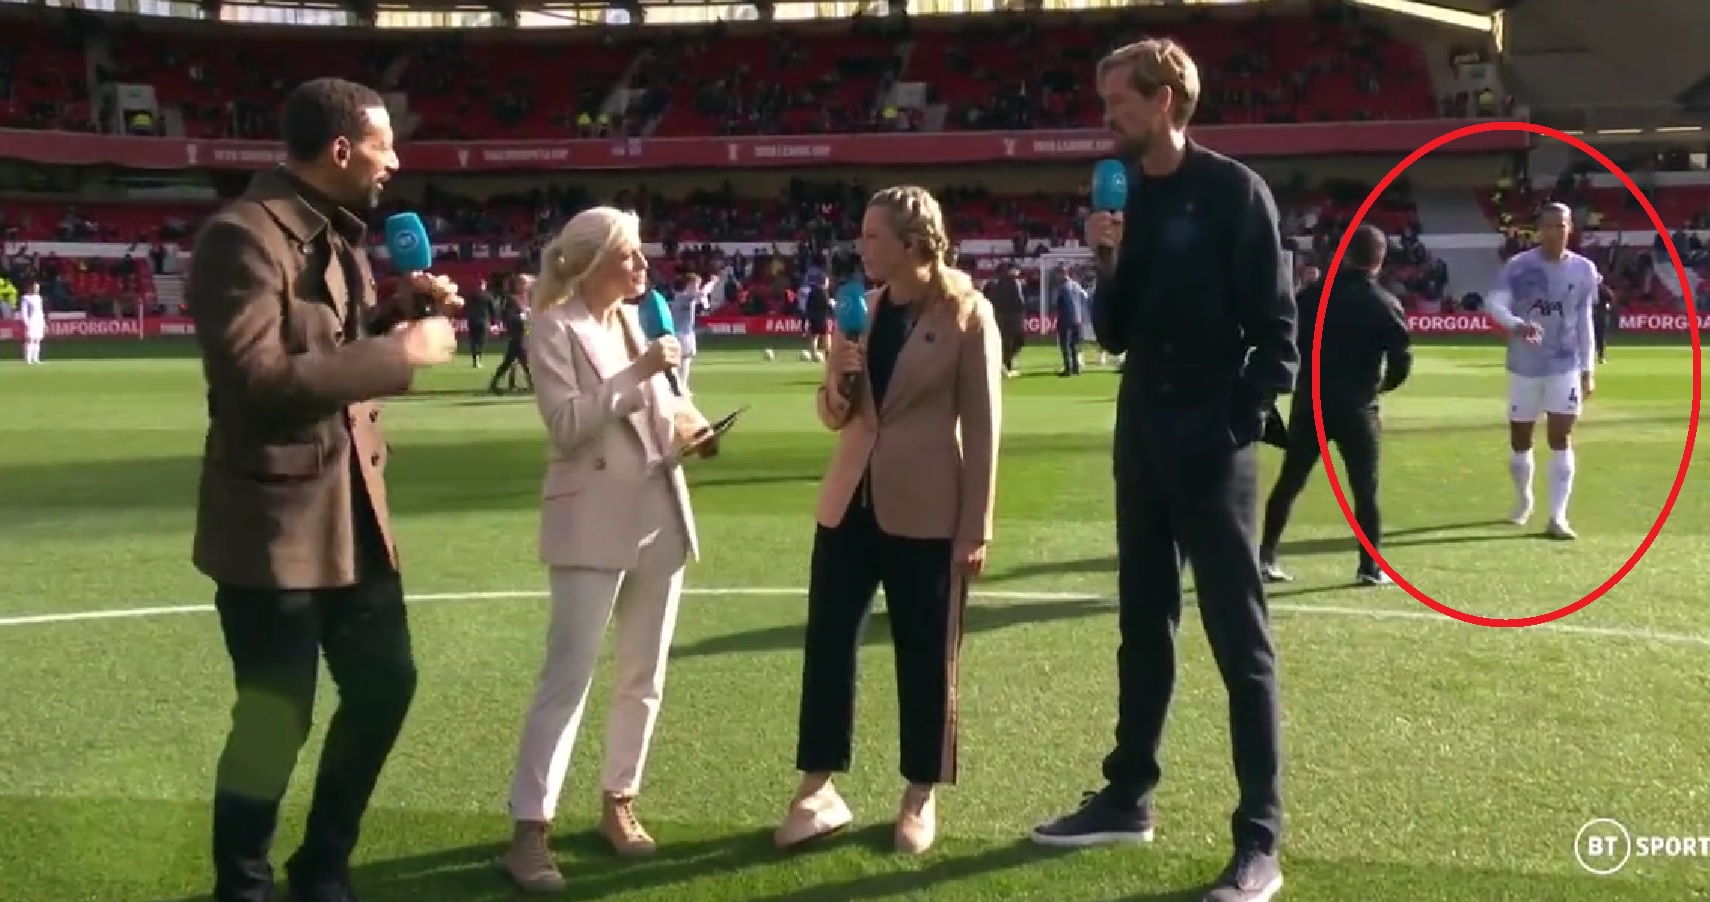 (Video) What Van Dijk did to BT Sport team when they got in way of pre-match warmup